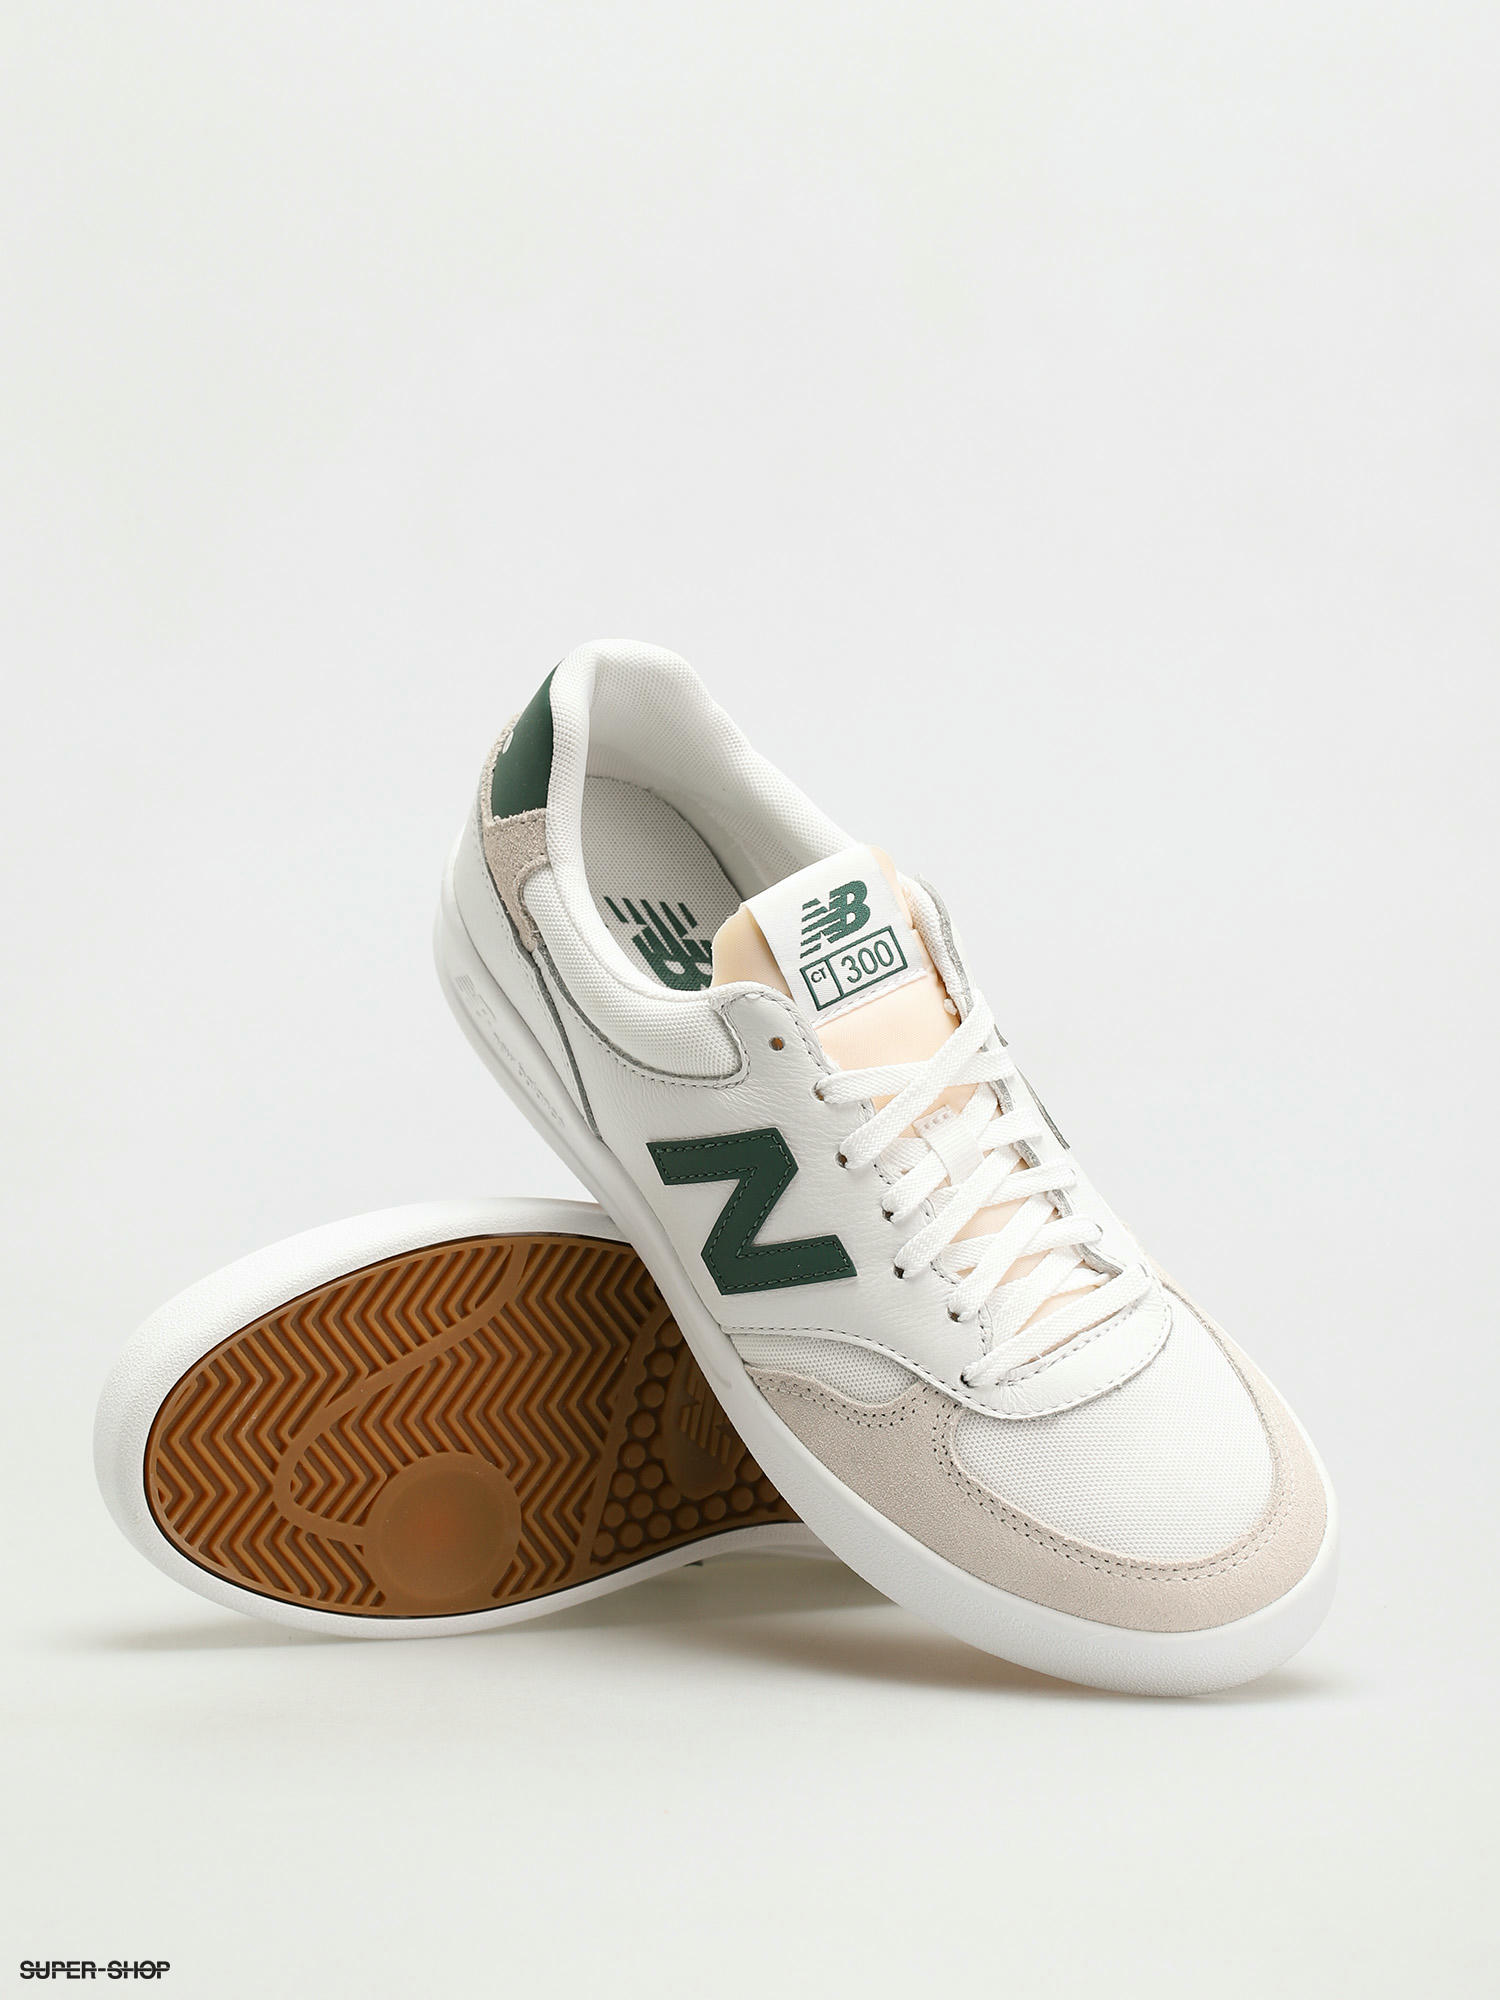 New 300 Shoes (white/green)